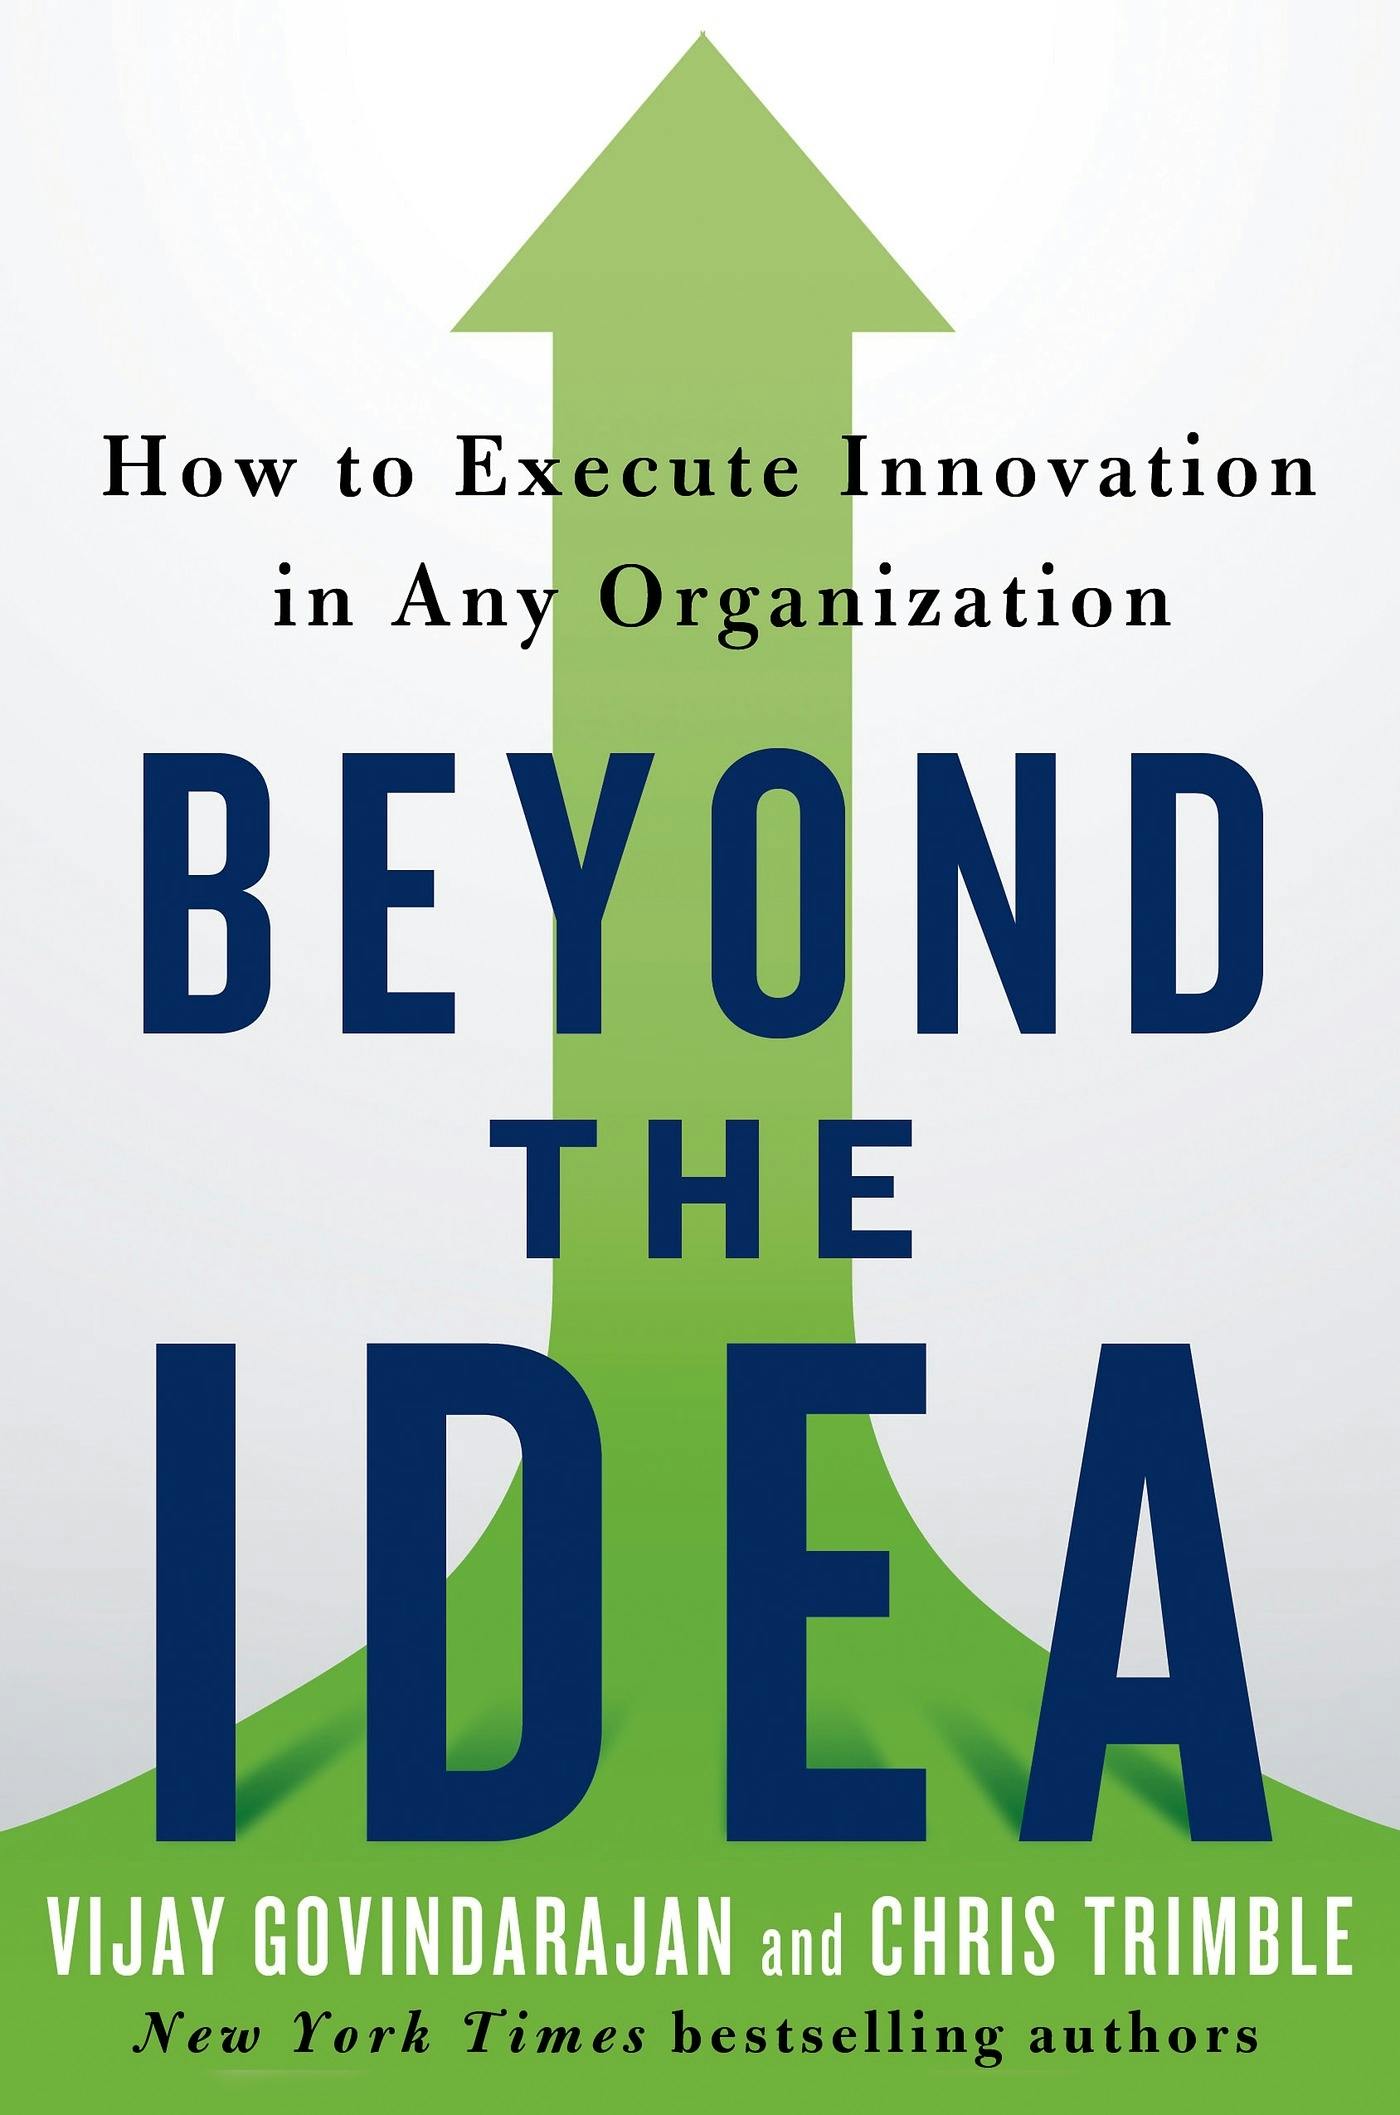 Describes for Beyond the Idea by authors